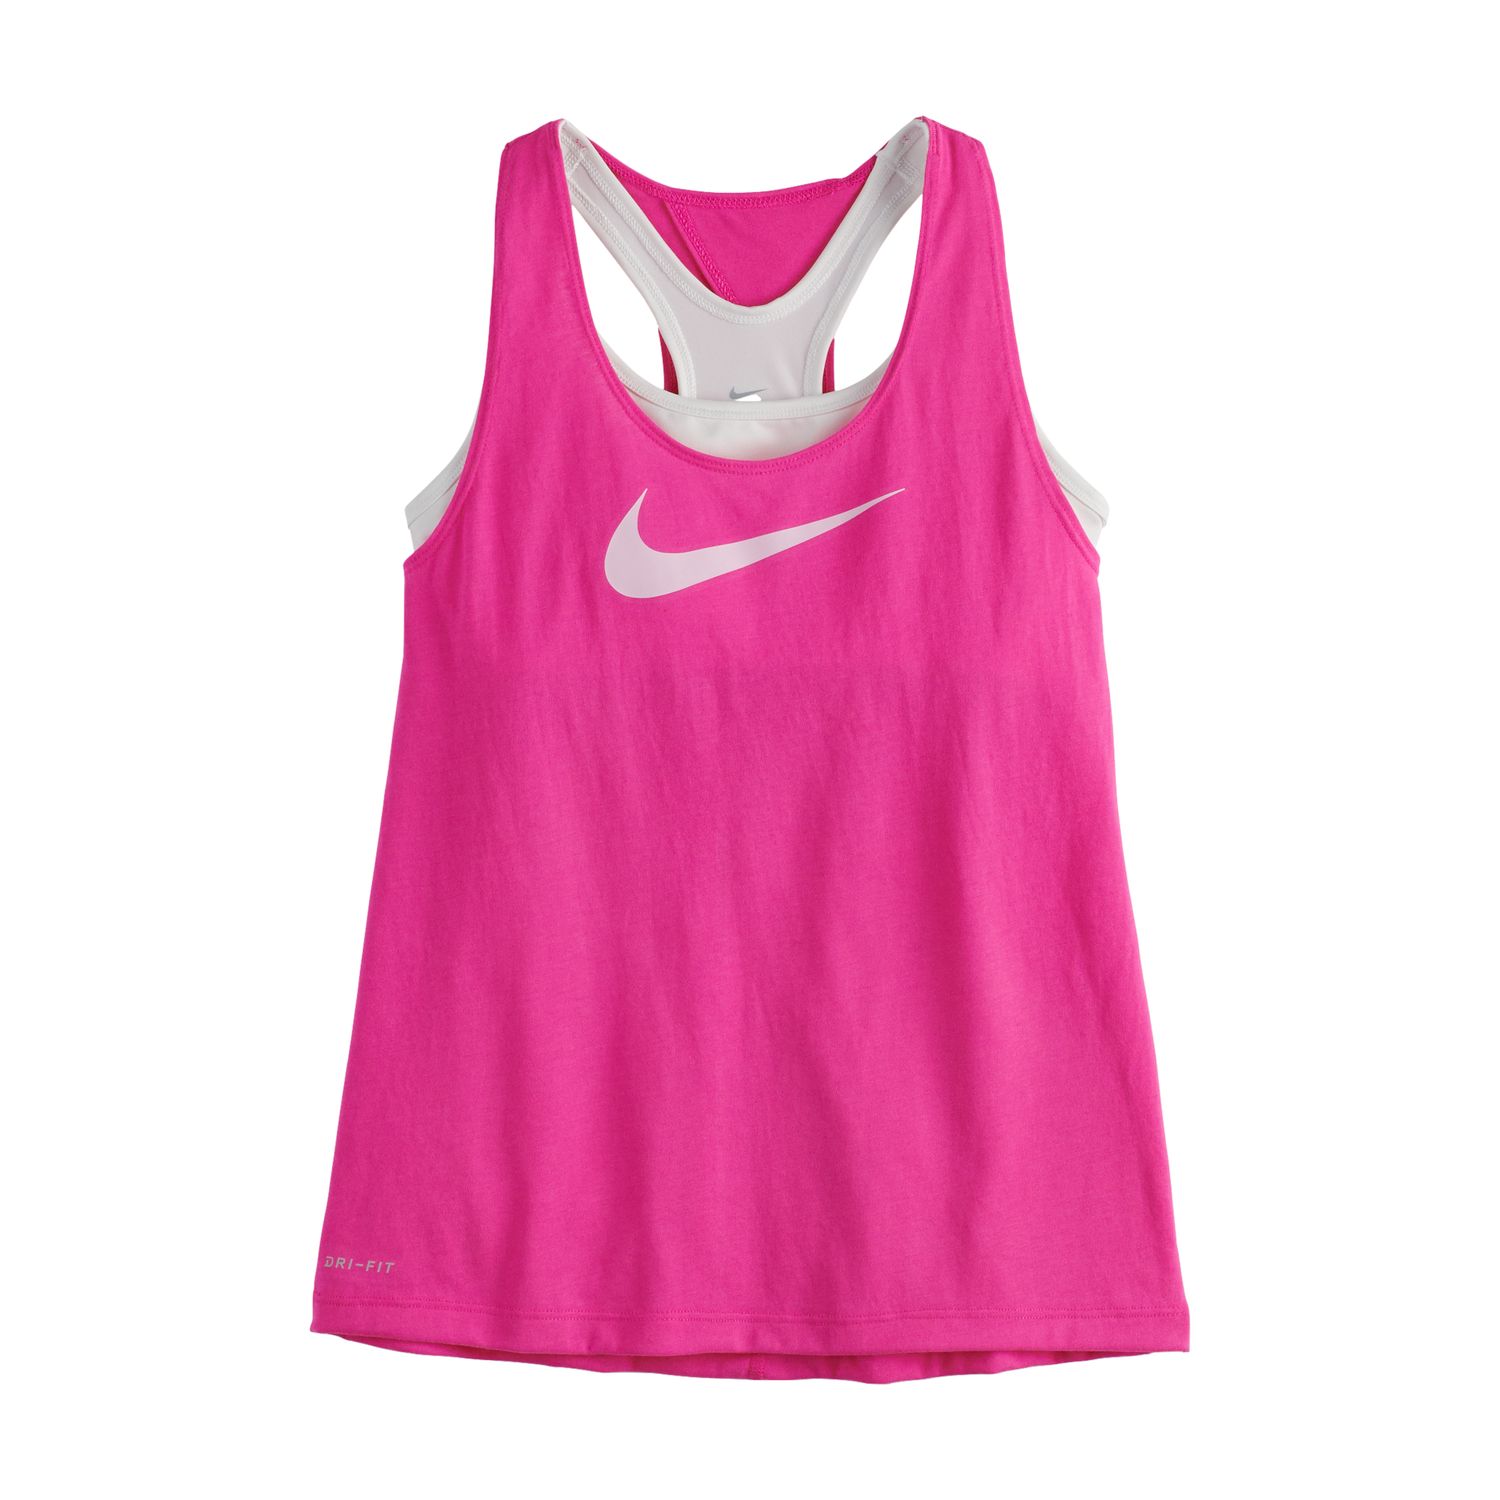 Nike Tank Top With Built In Sports Bra on Sale 